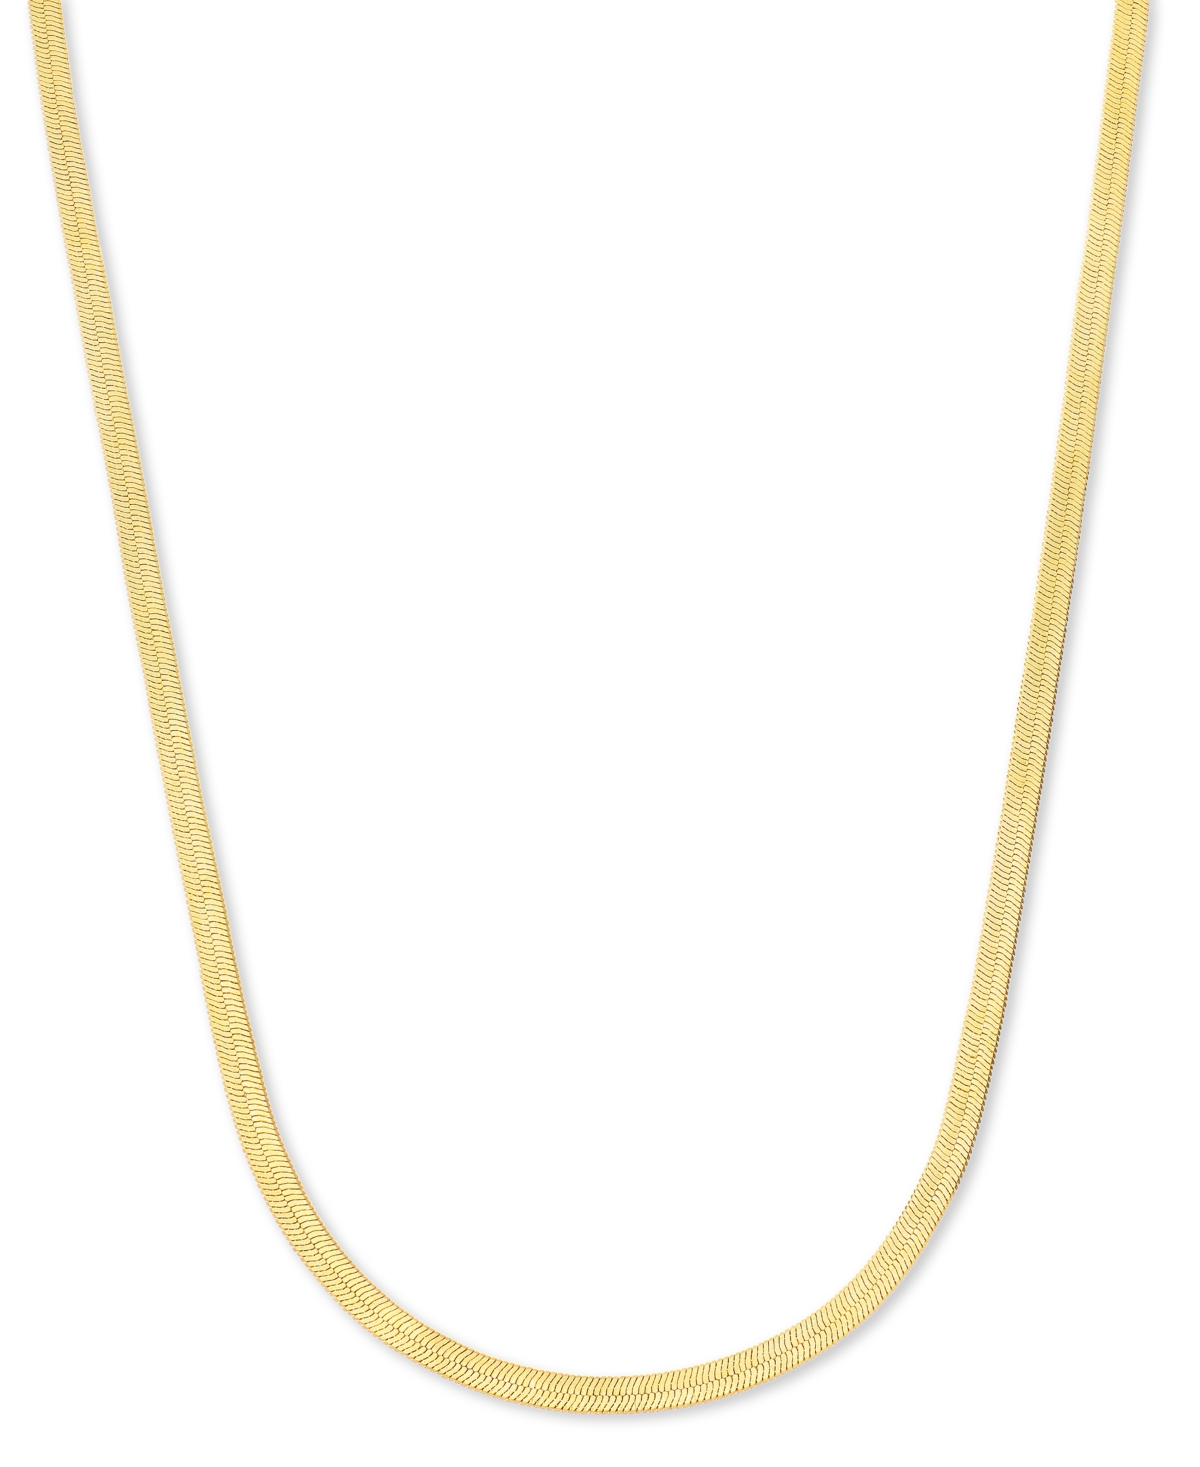 18k Gold-Plated Stainless Steel Herringbone Chain 16" Collar Necklace - Gold